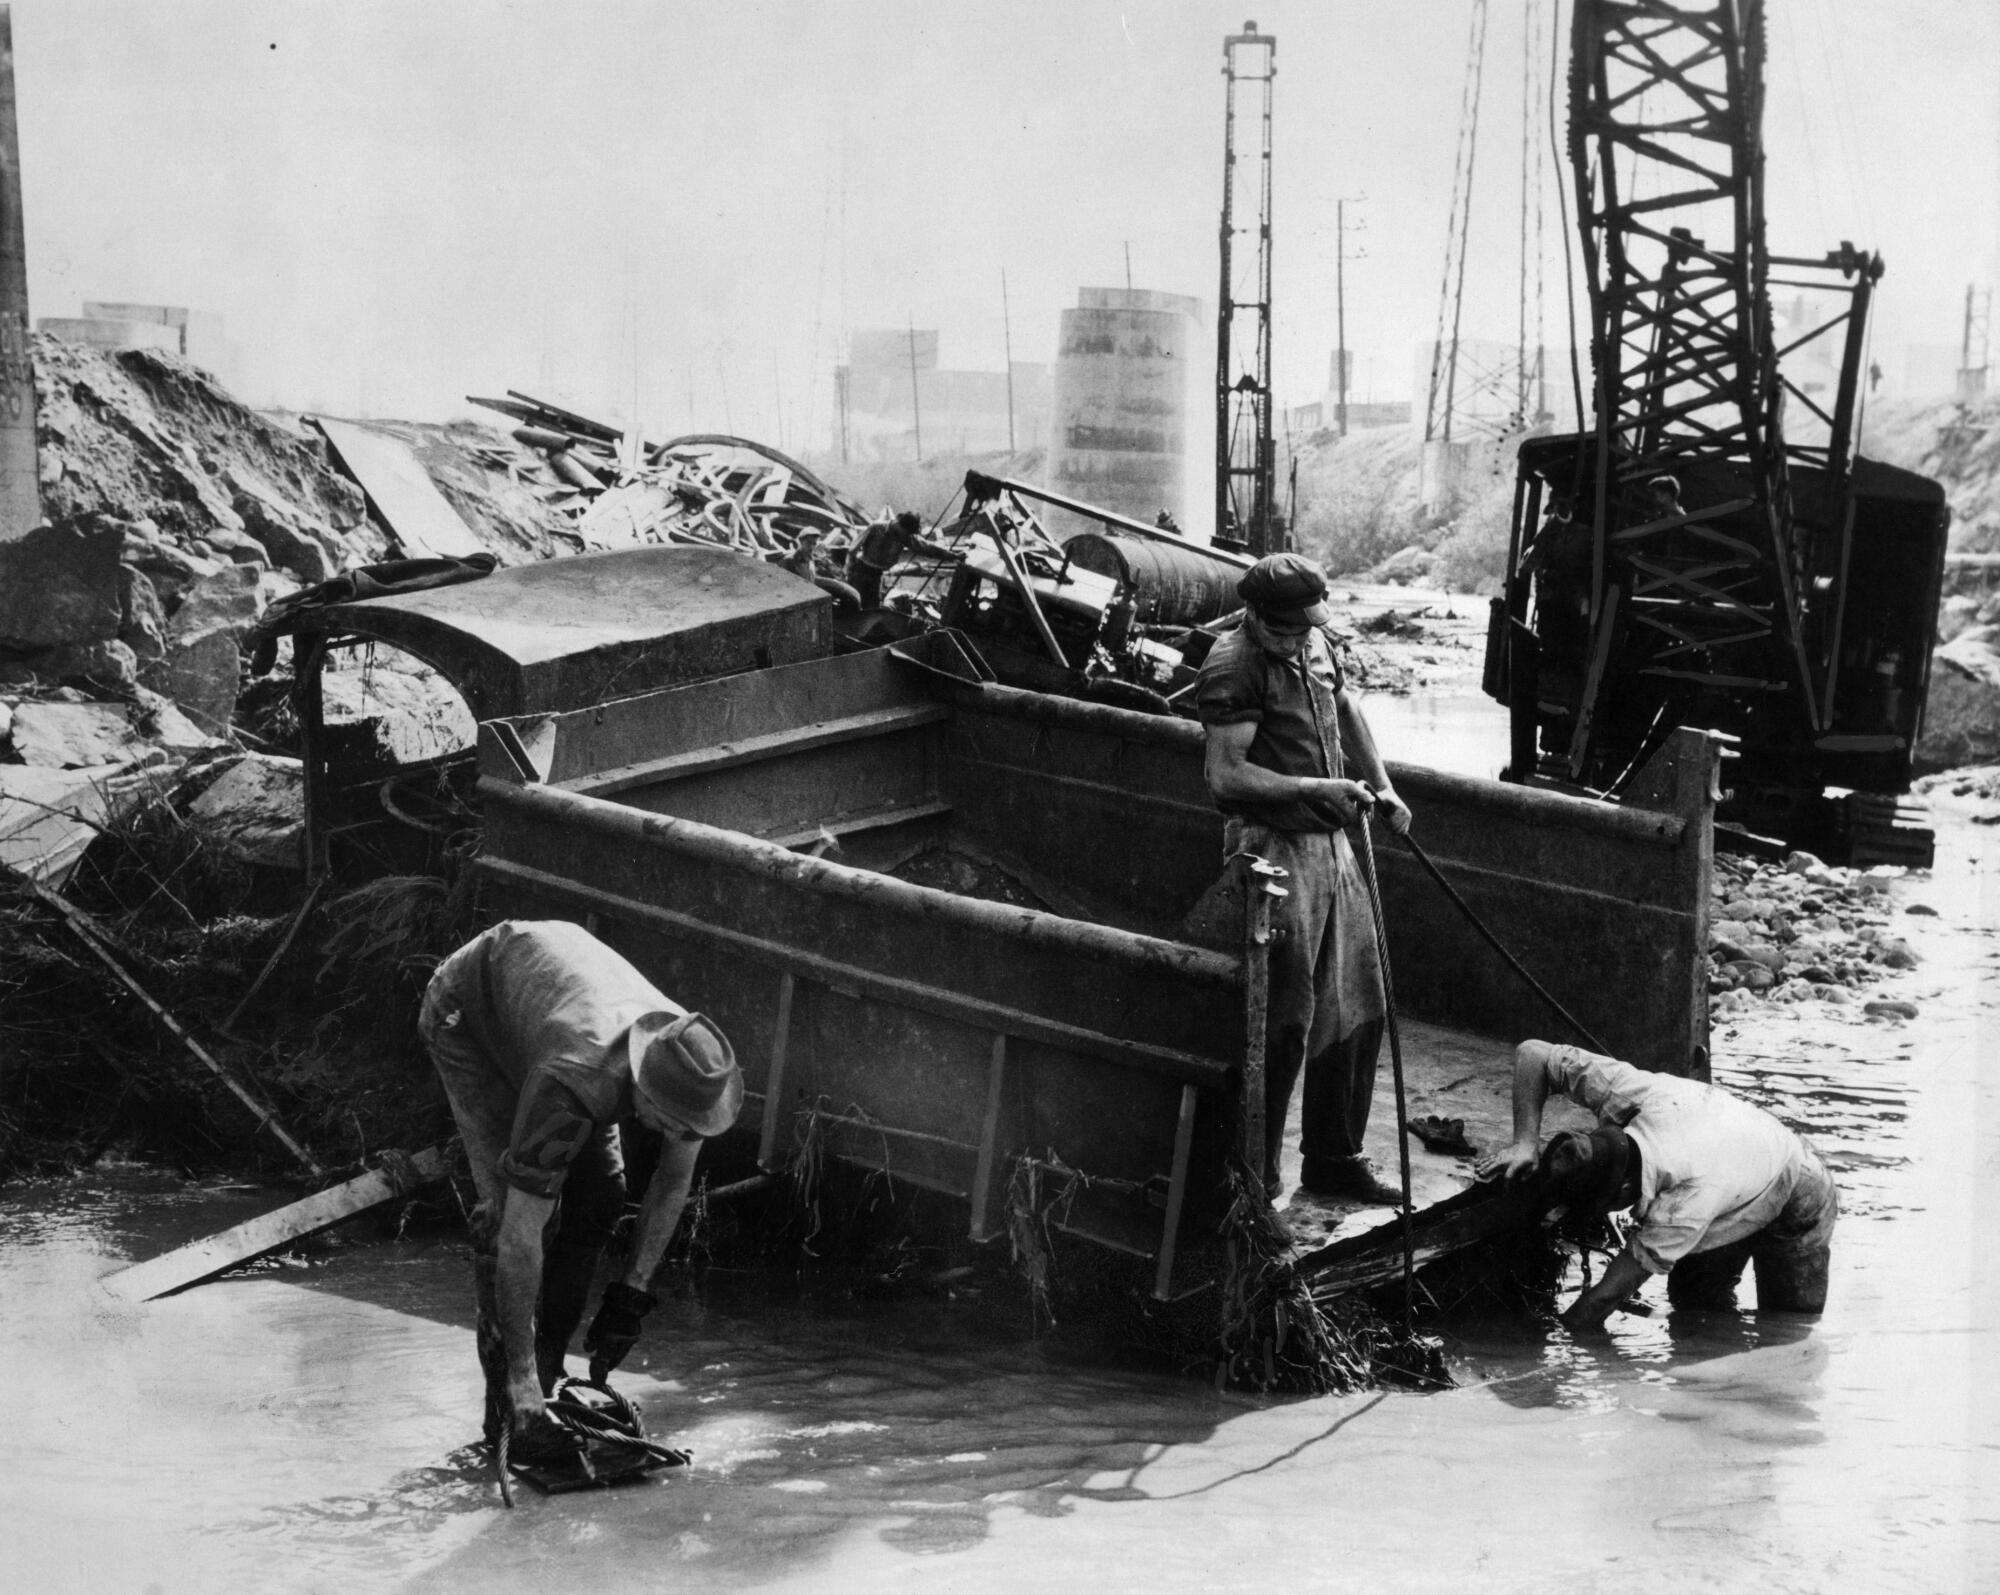 A historical photo of a flooded construction project.